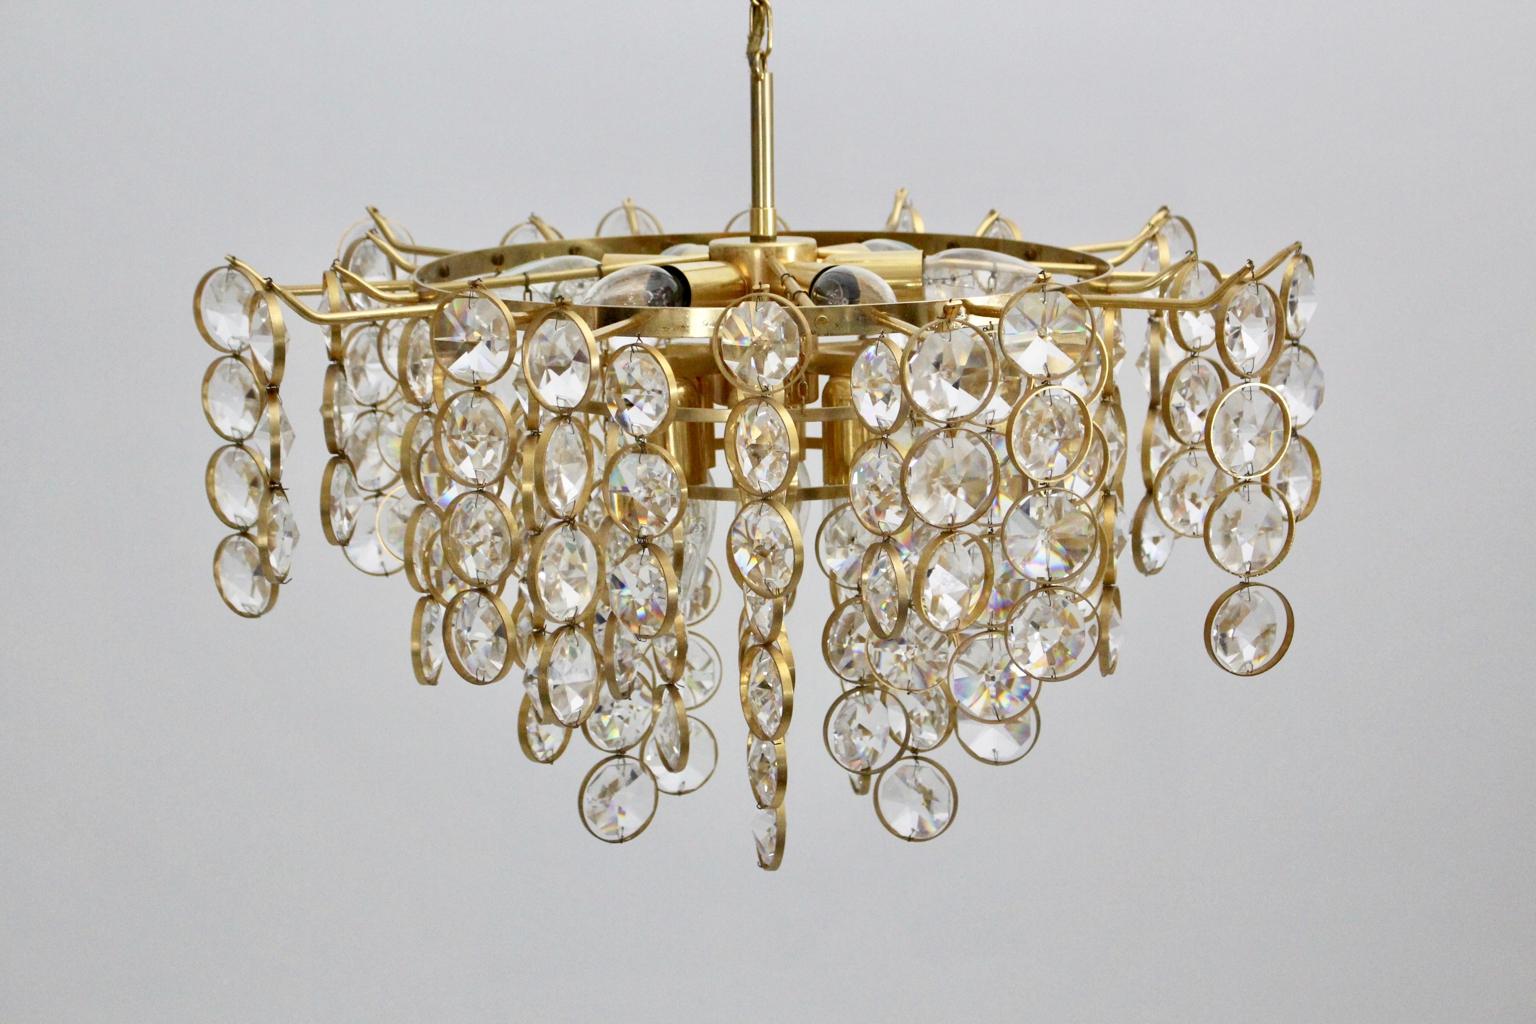 This sparkling brass and crystal vintage chandelier by Gaetano Sciolari (1927-1994)
consists of brass and crystal glass. The brass construction, which build the 3-tiered frame, shows many brass rings with polished glass crystals in different